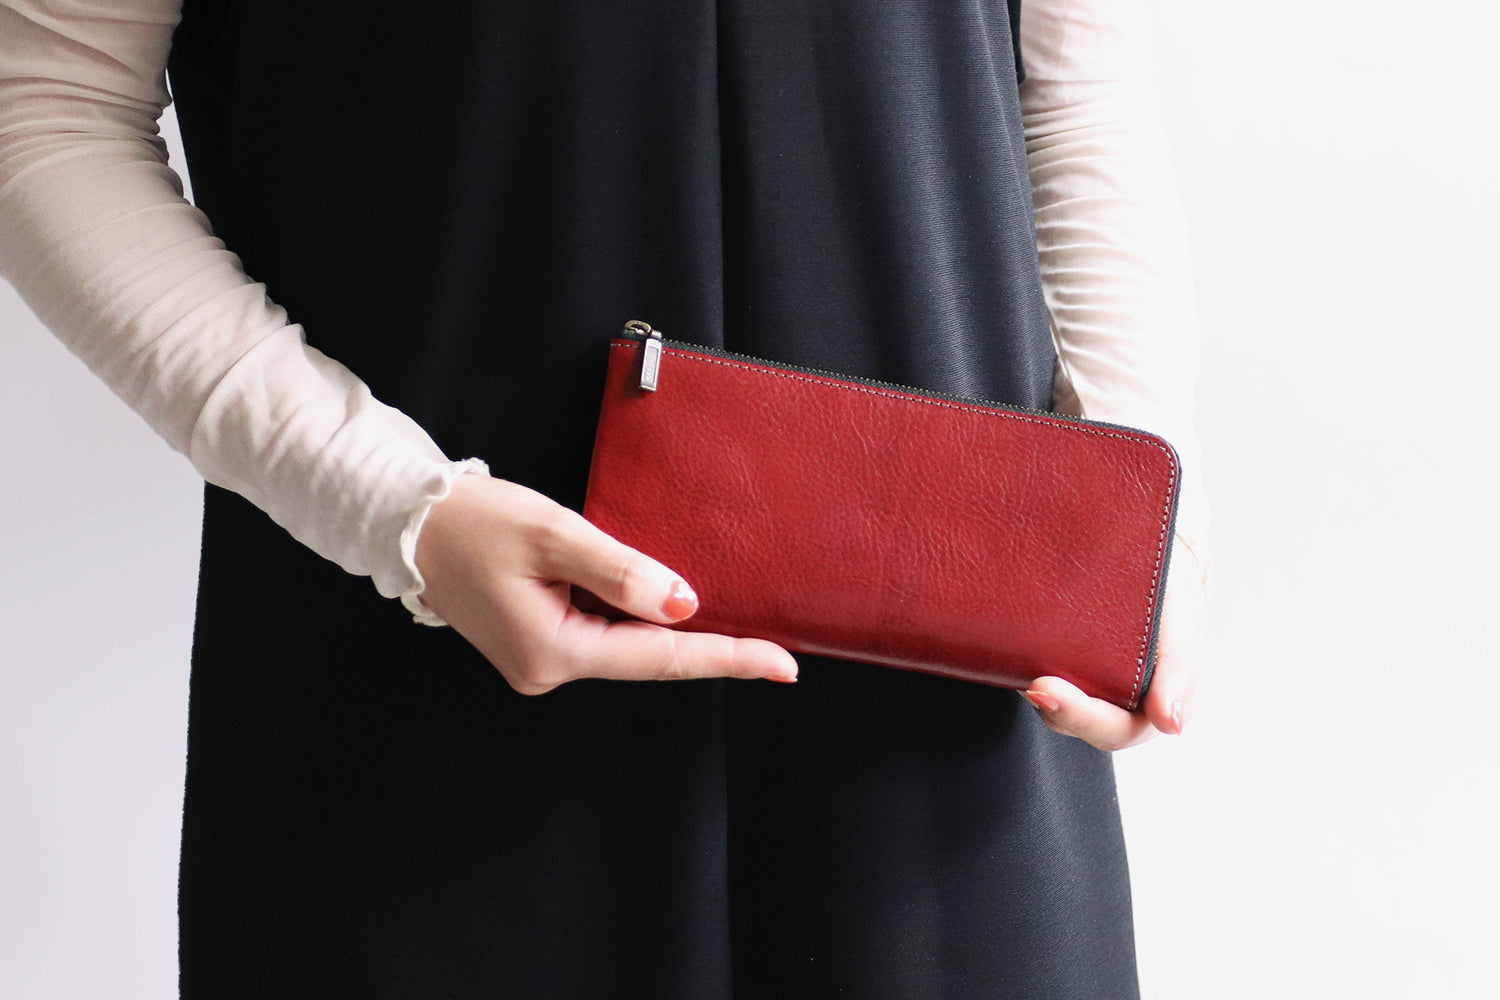 FU-SI FERNALLE / OLFAS Fits comfortably in your hand. L zipper long wallet made of tasteful high quality Italian leather